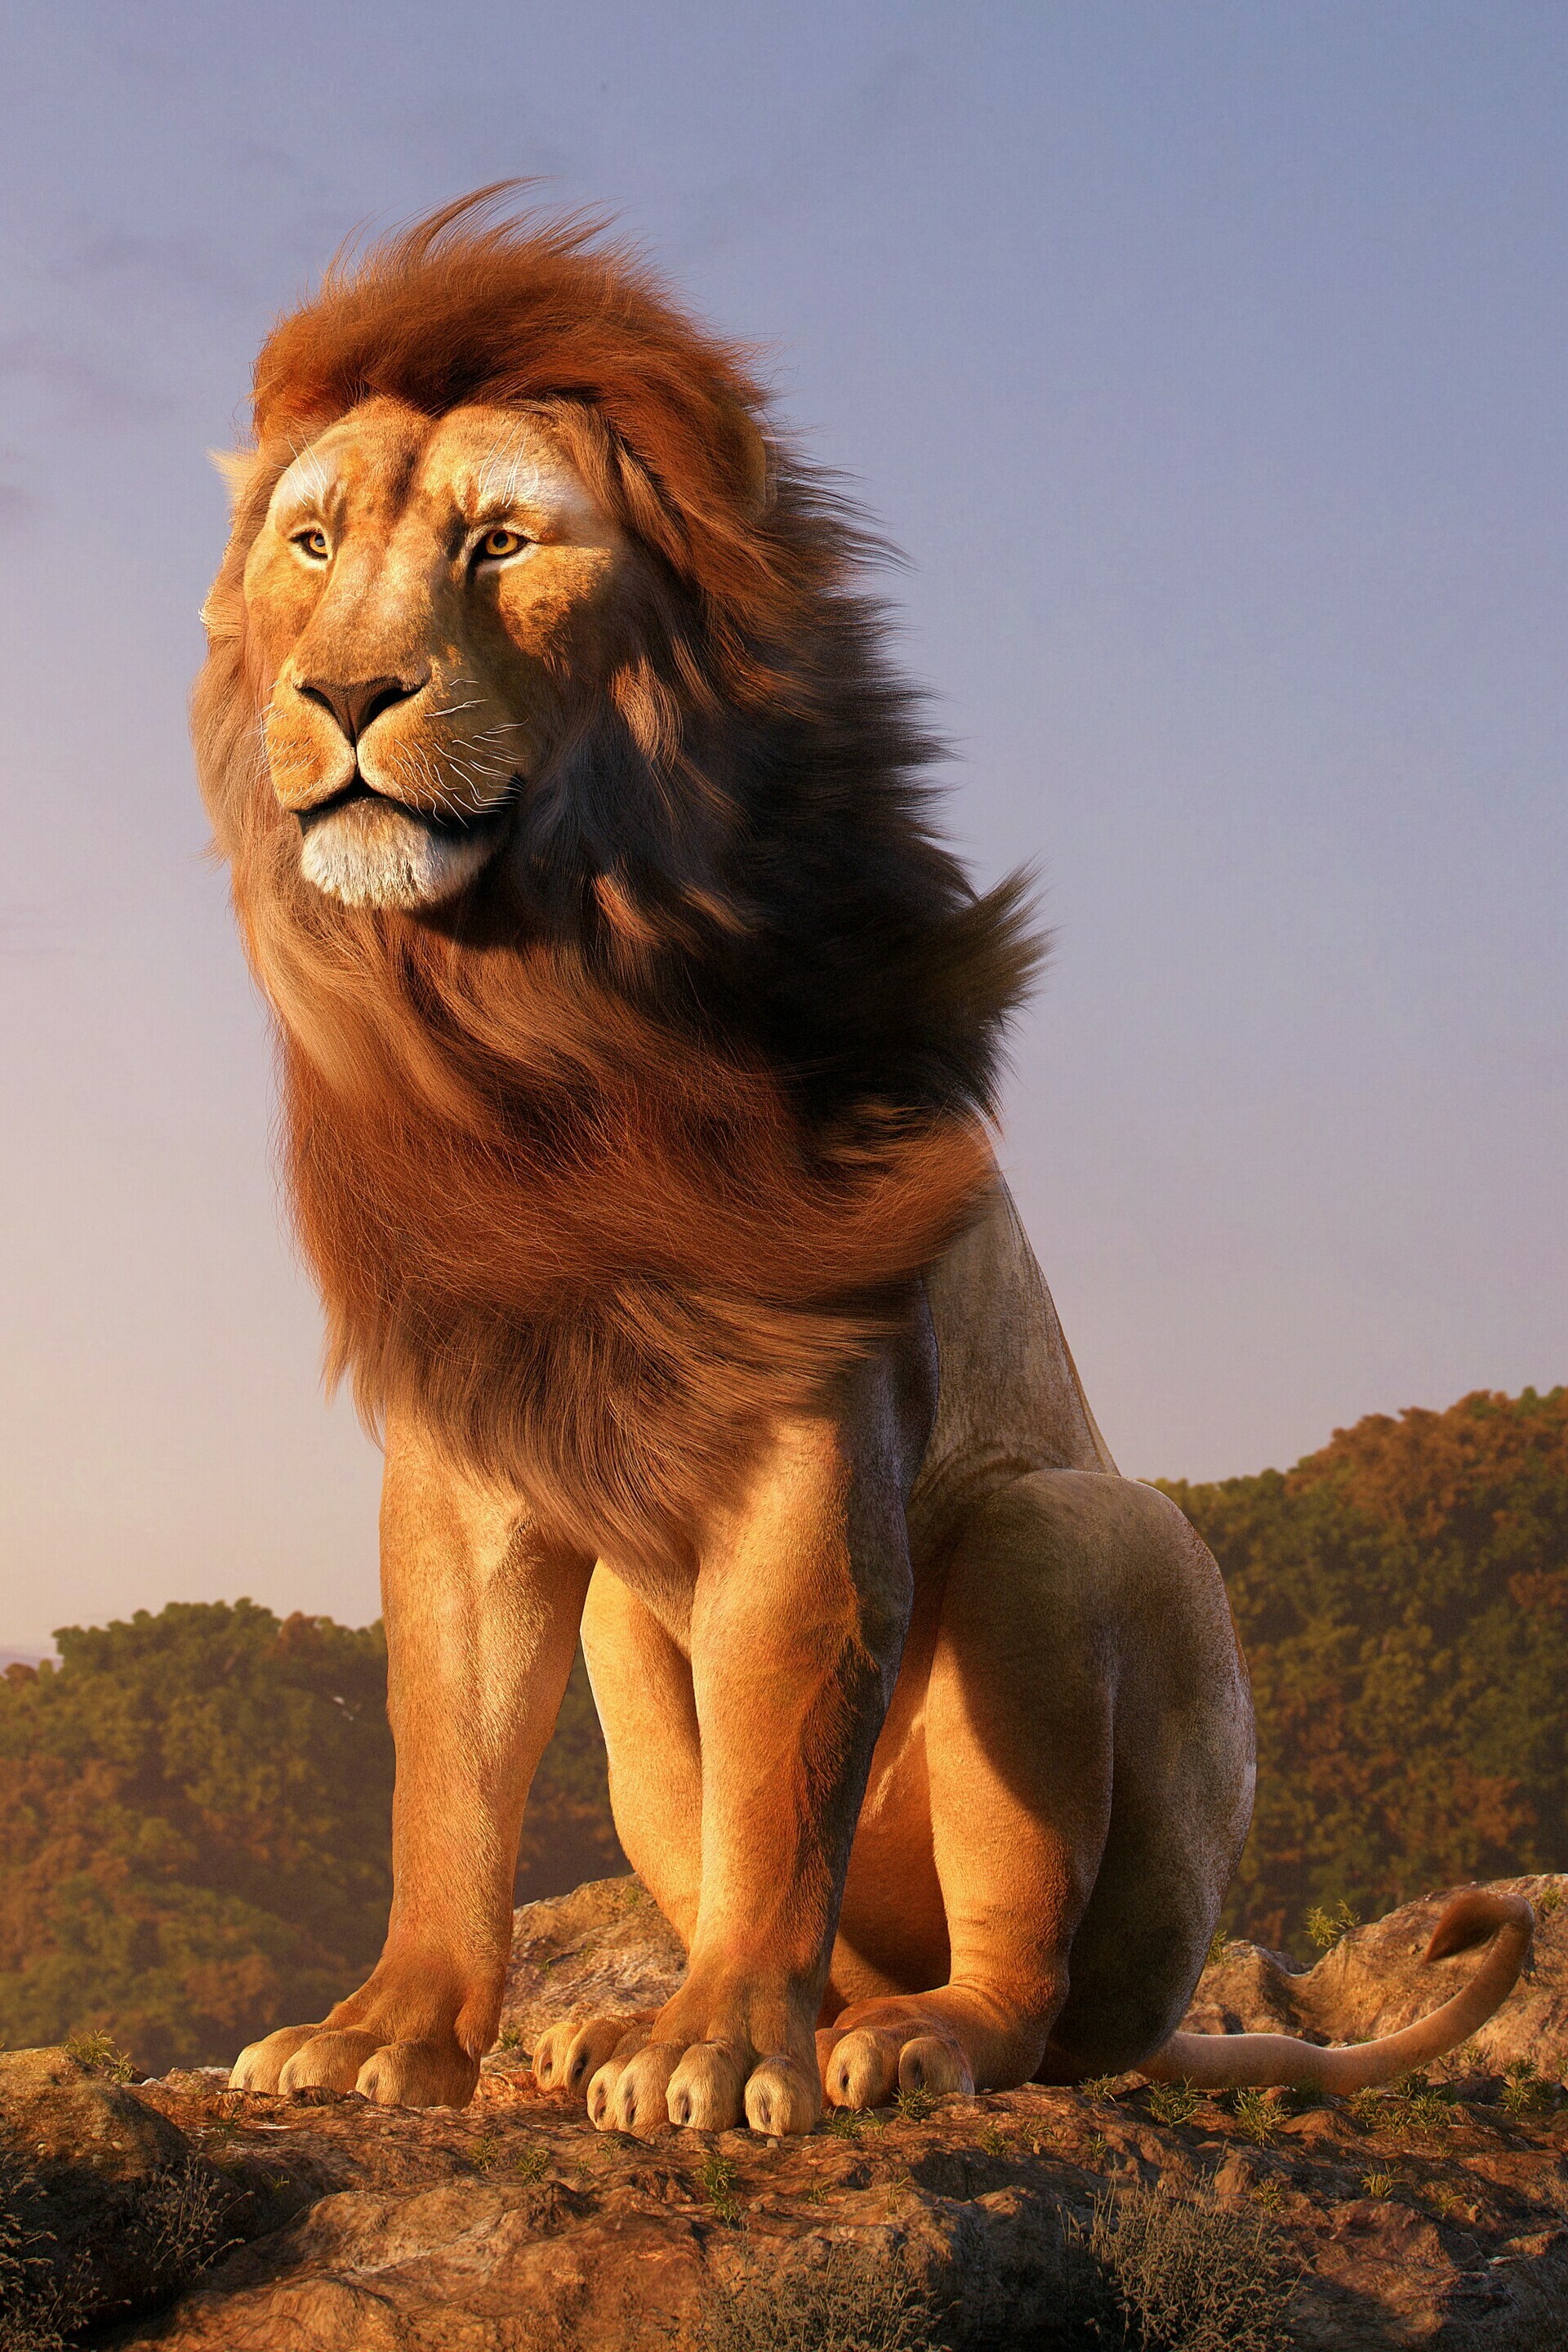 The Lion King: Mufasa voiced by Aaron Pierre, The kind and noble lion prince of the African Pride Lands. 1920x2880 HD Wallpaper.